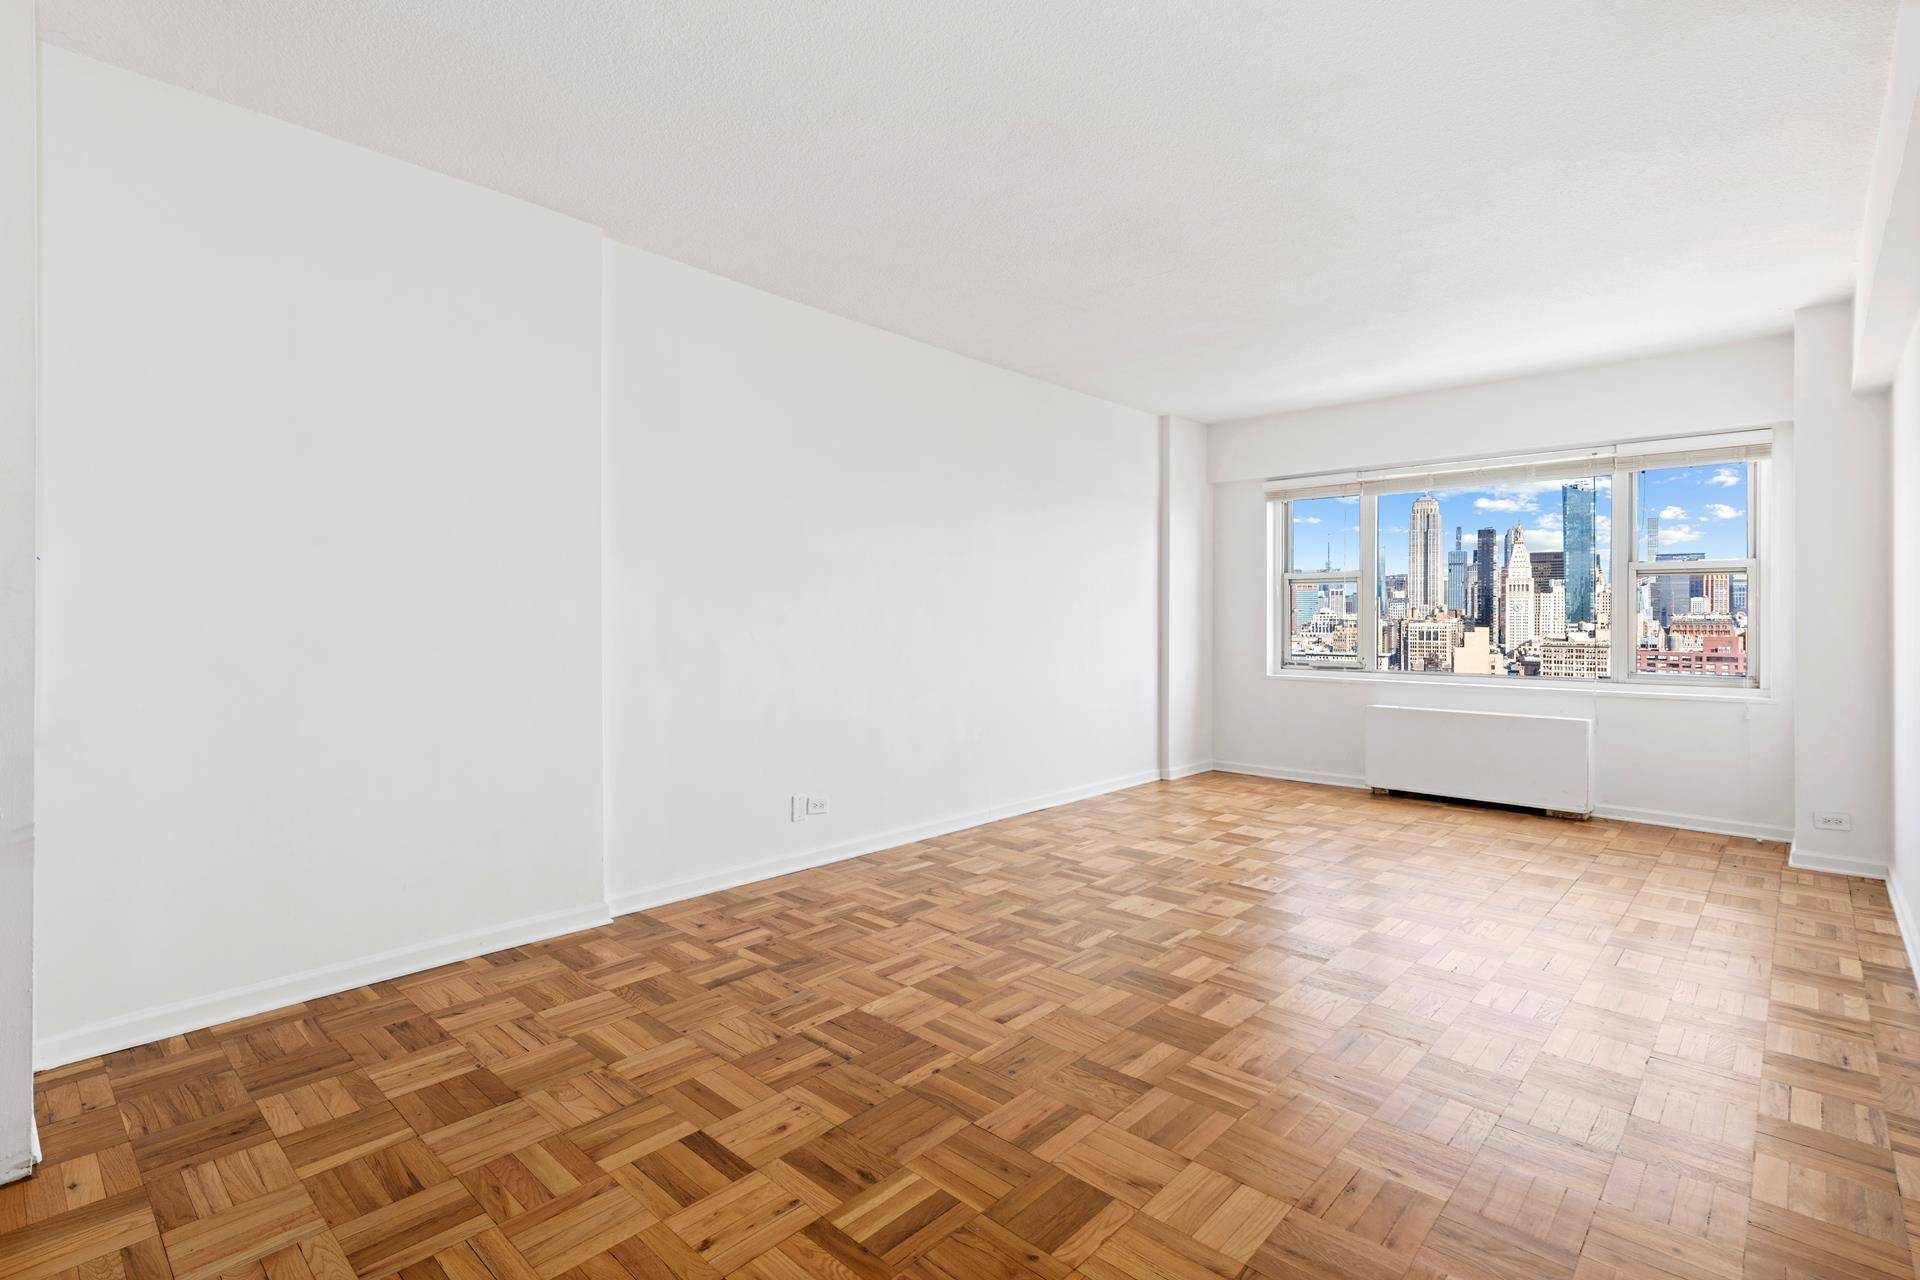 Spectacular open city skyline views, from all rooms of this high rise 31st floor 2 bedroom 2 bath home.